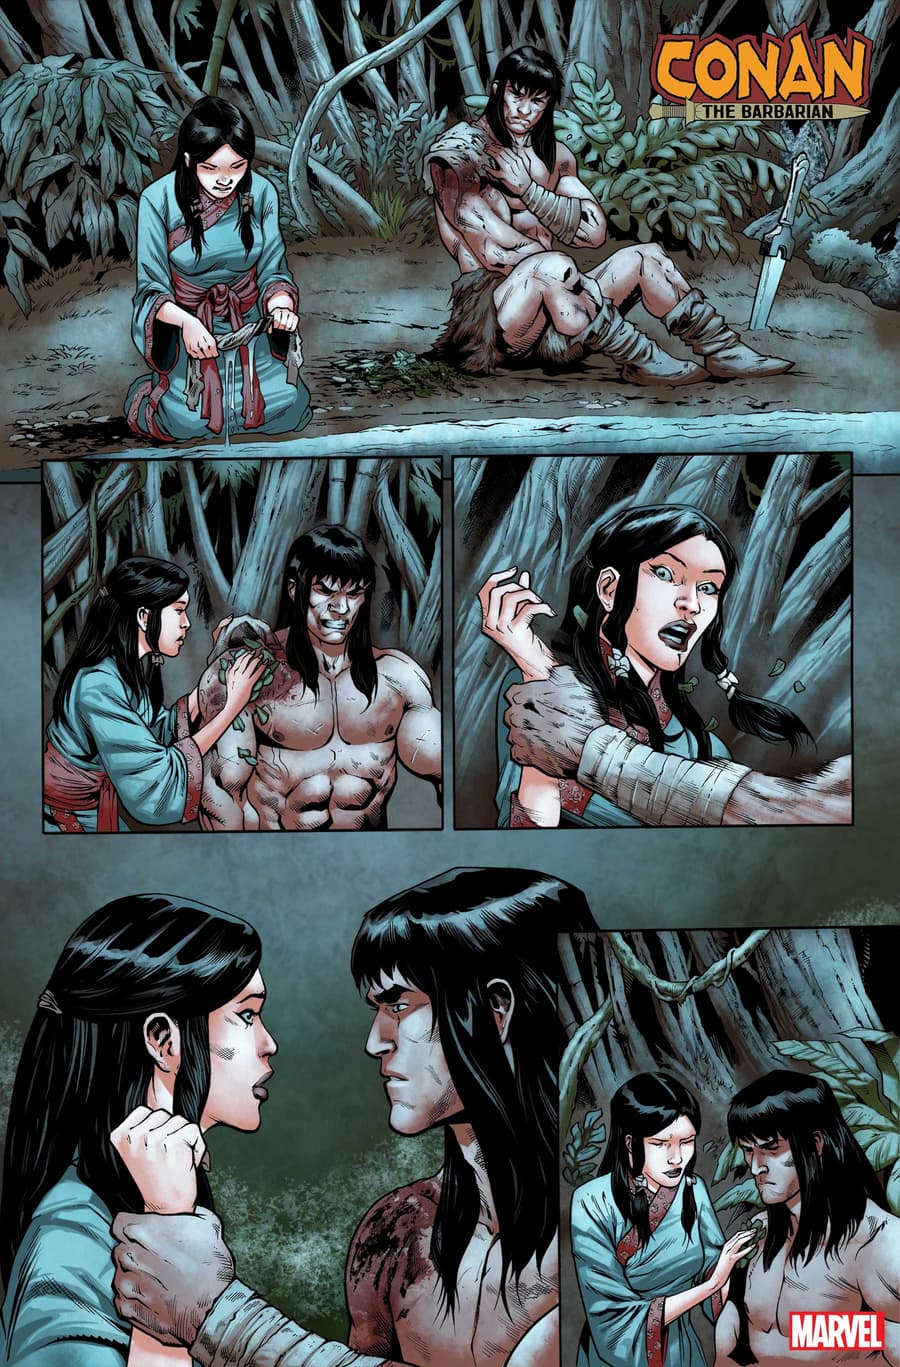 CONAN THE BARBARIAN #20 pencils by Cory Smith, inks by Roberto Poggi, and colors by Israel Silva